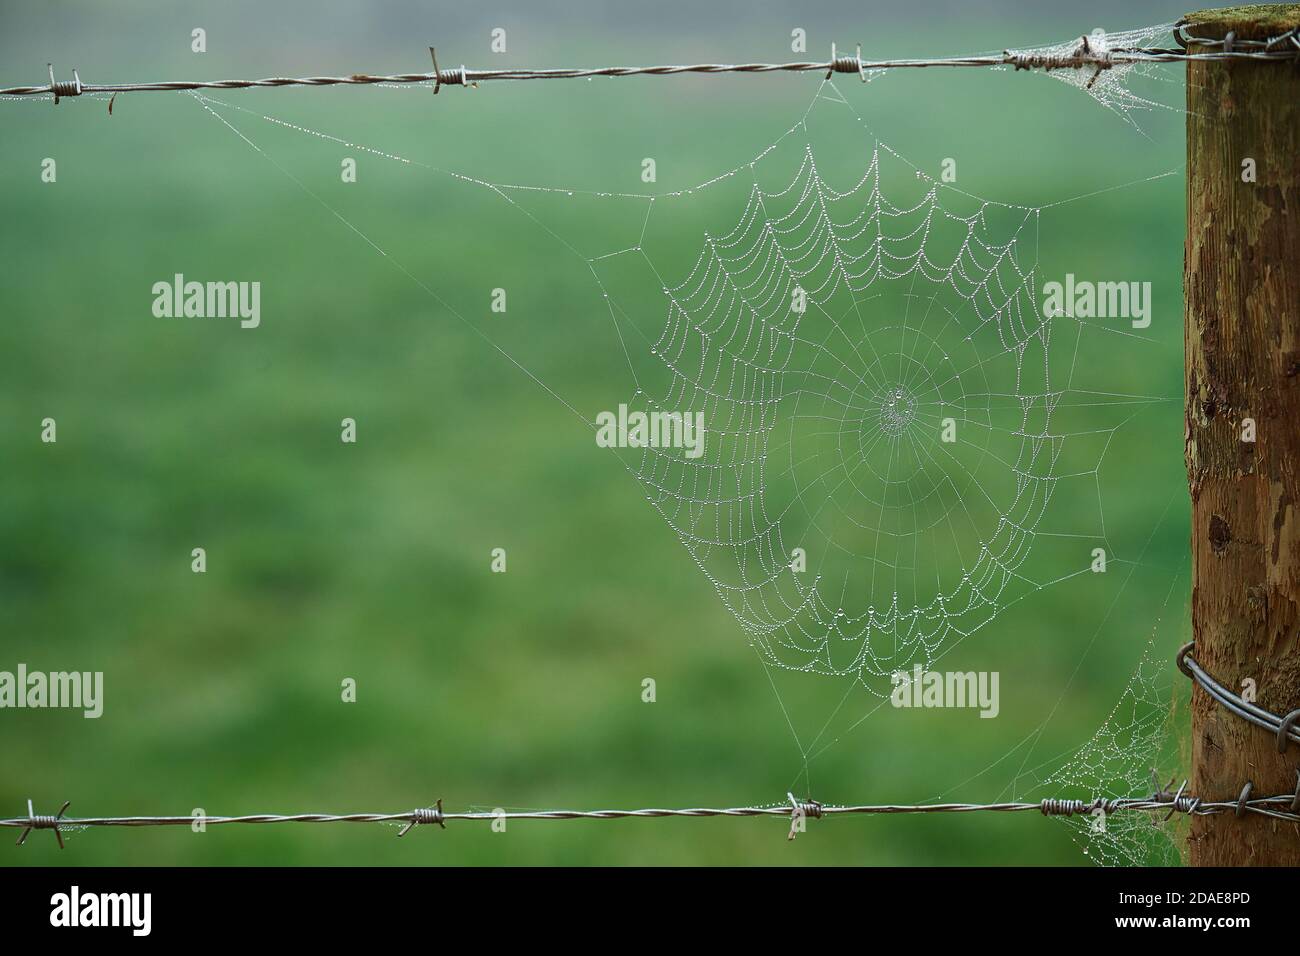 Spiders web covered in early morning mist Stock Photo